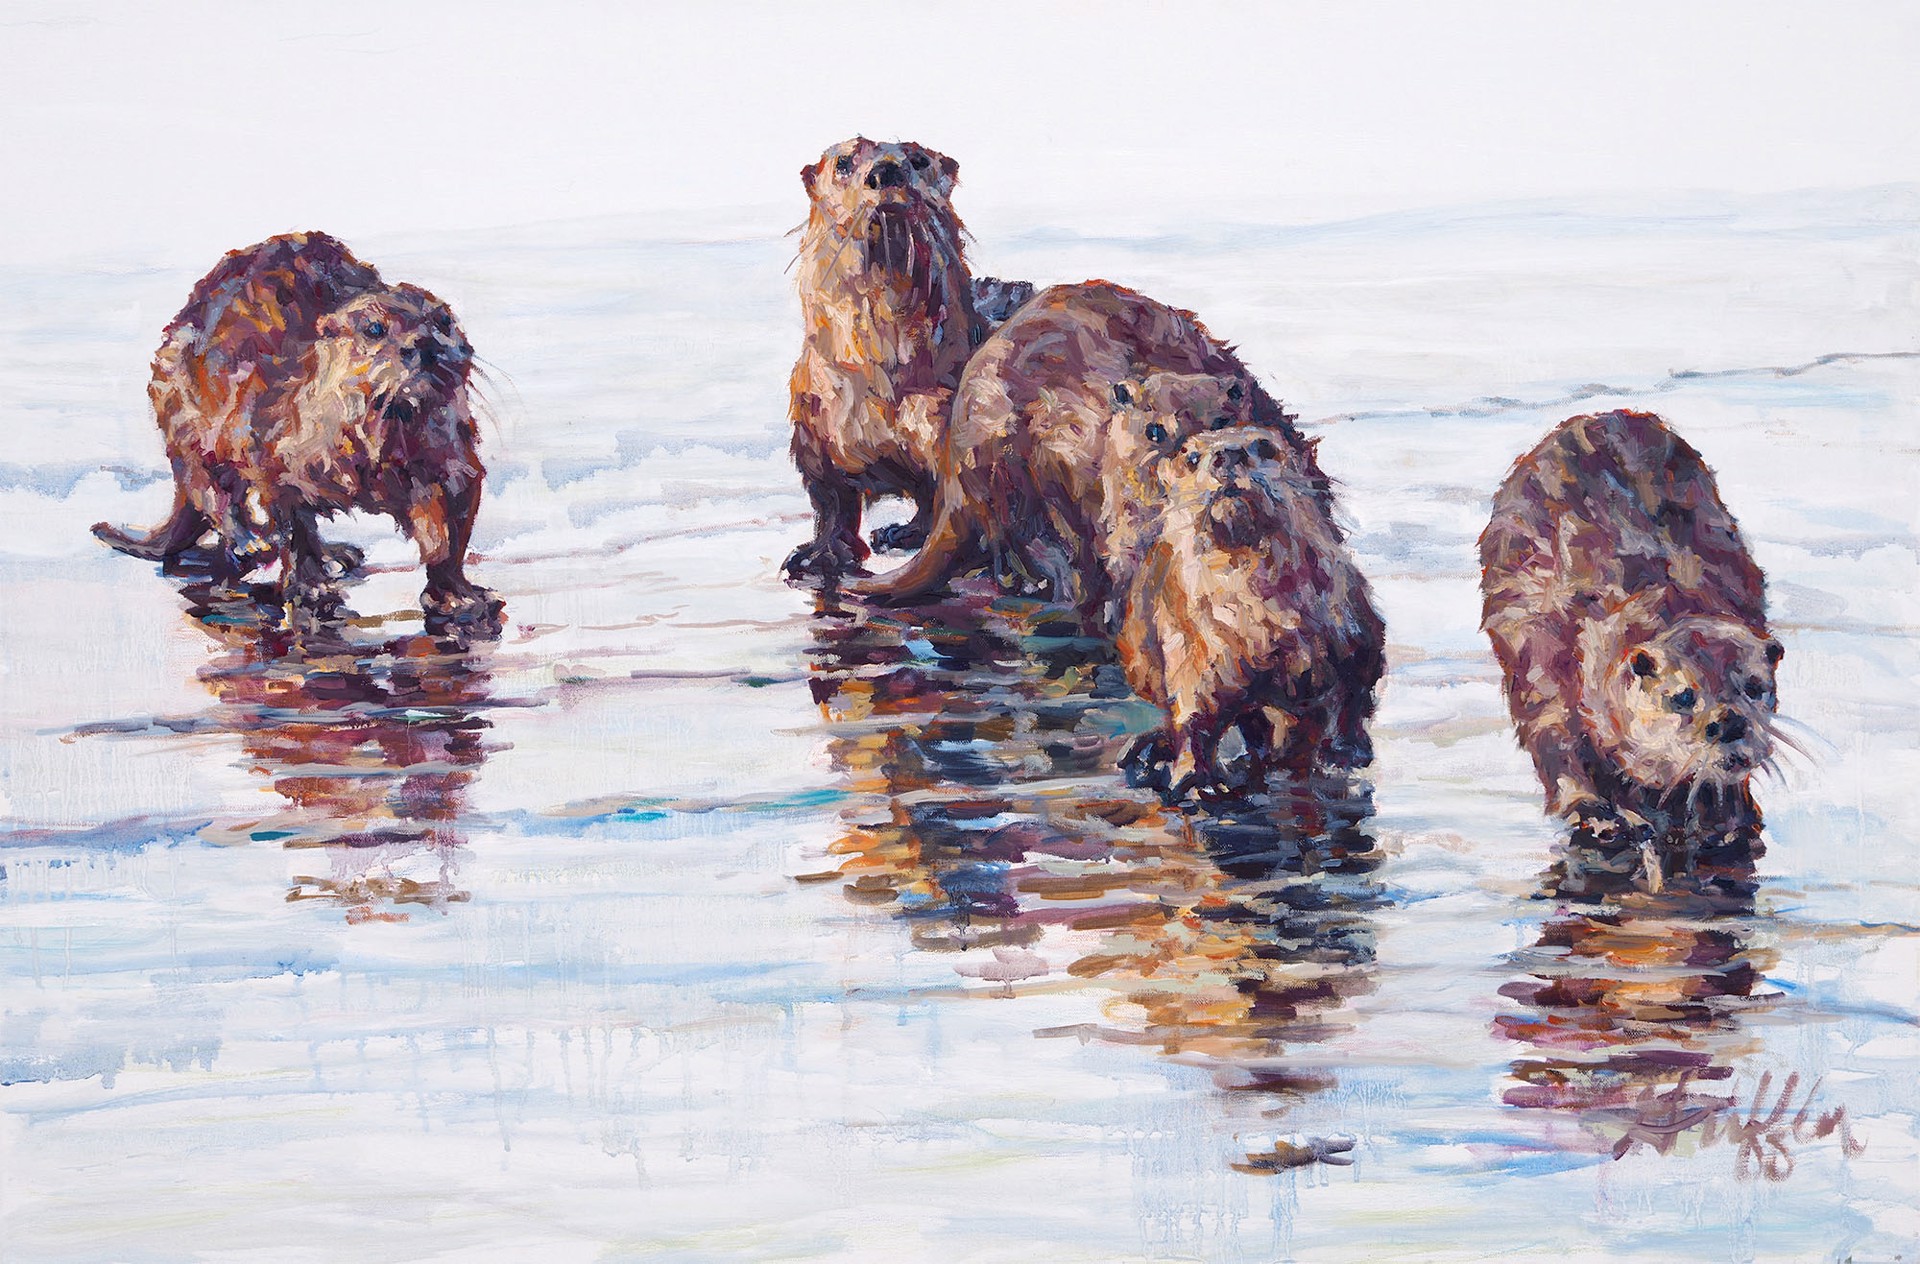 Original Oil Painting By Patricia Griffin Featuring A Group Of Otter In The Snow